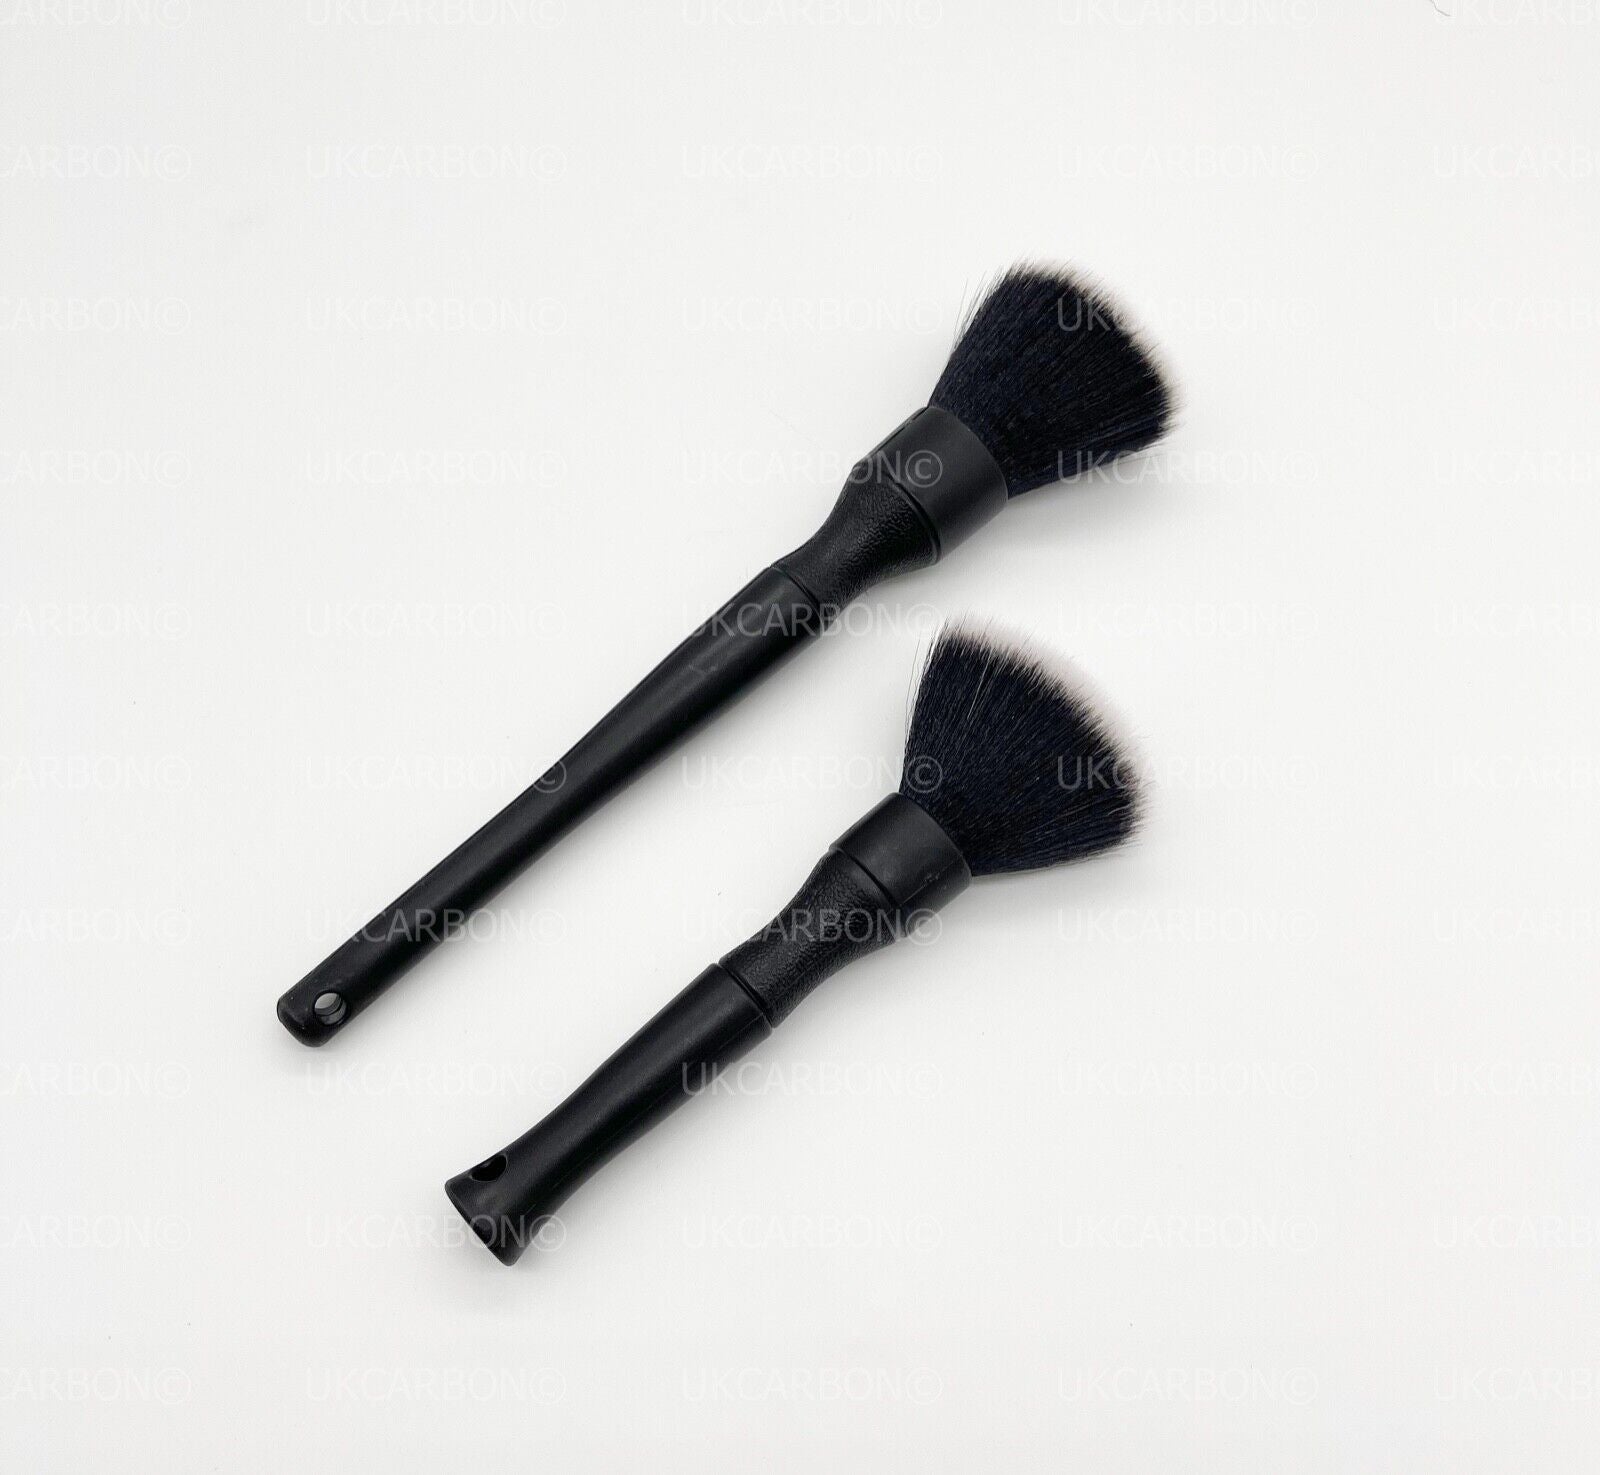 Ultra Soft Detailing Cleaning Brush Set Interior & Exterior Car Dust Cleaner - UKCarbon